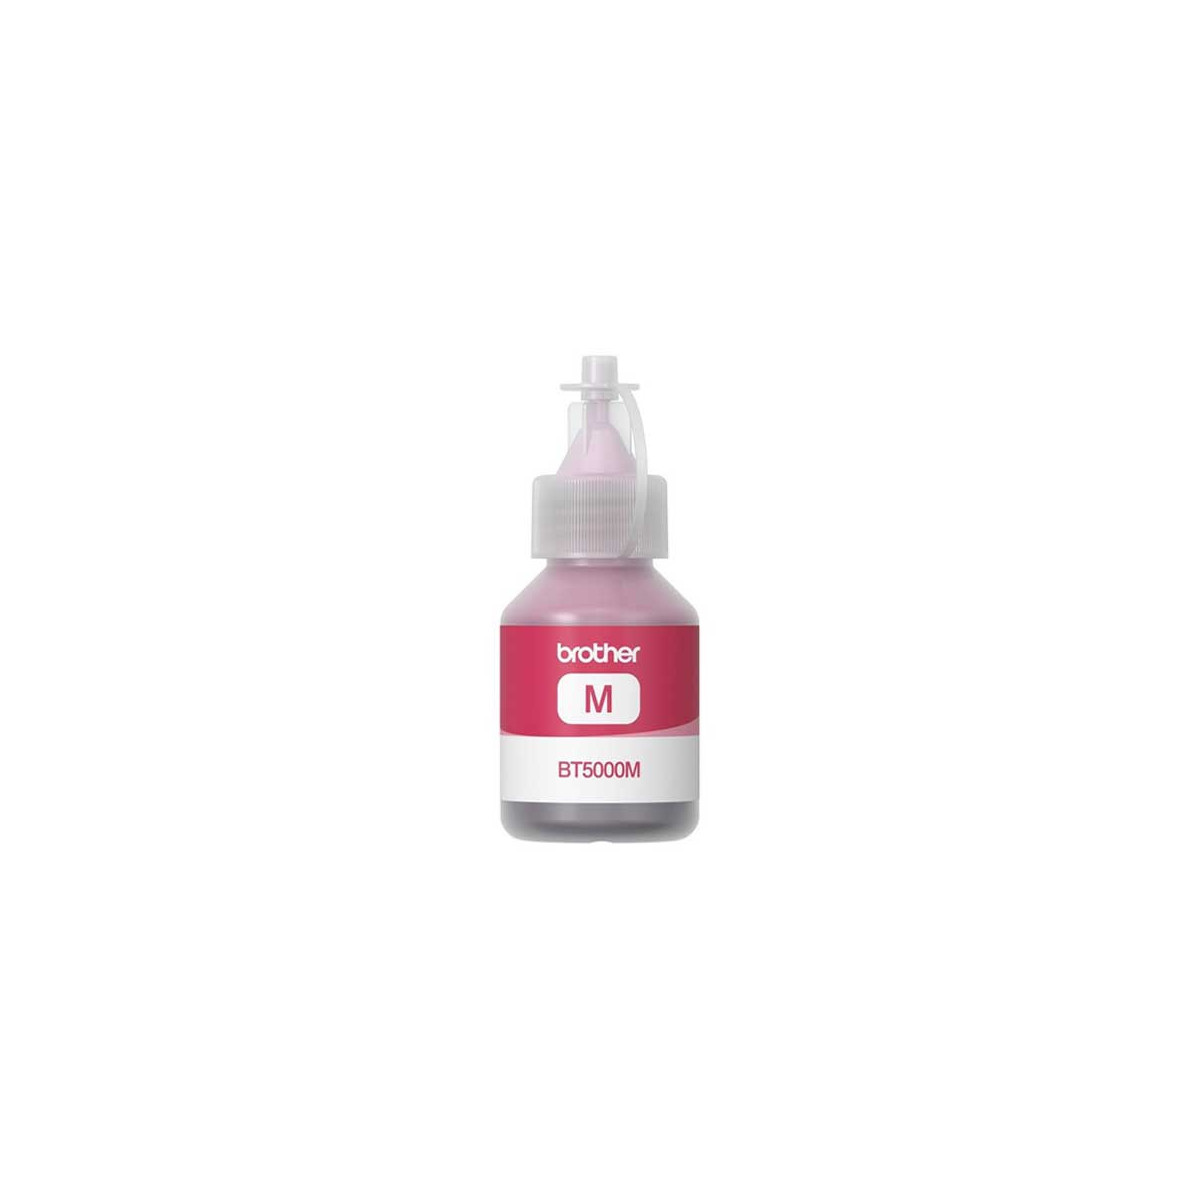 BOUTEILLE D'ENCRE ADAPTABLE BROTHER BT5000M - 50ML - MAGENTA